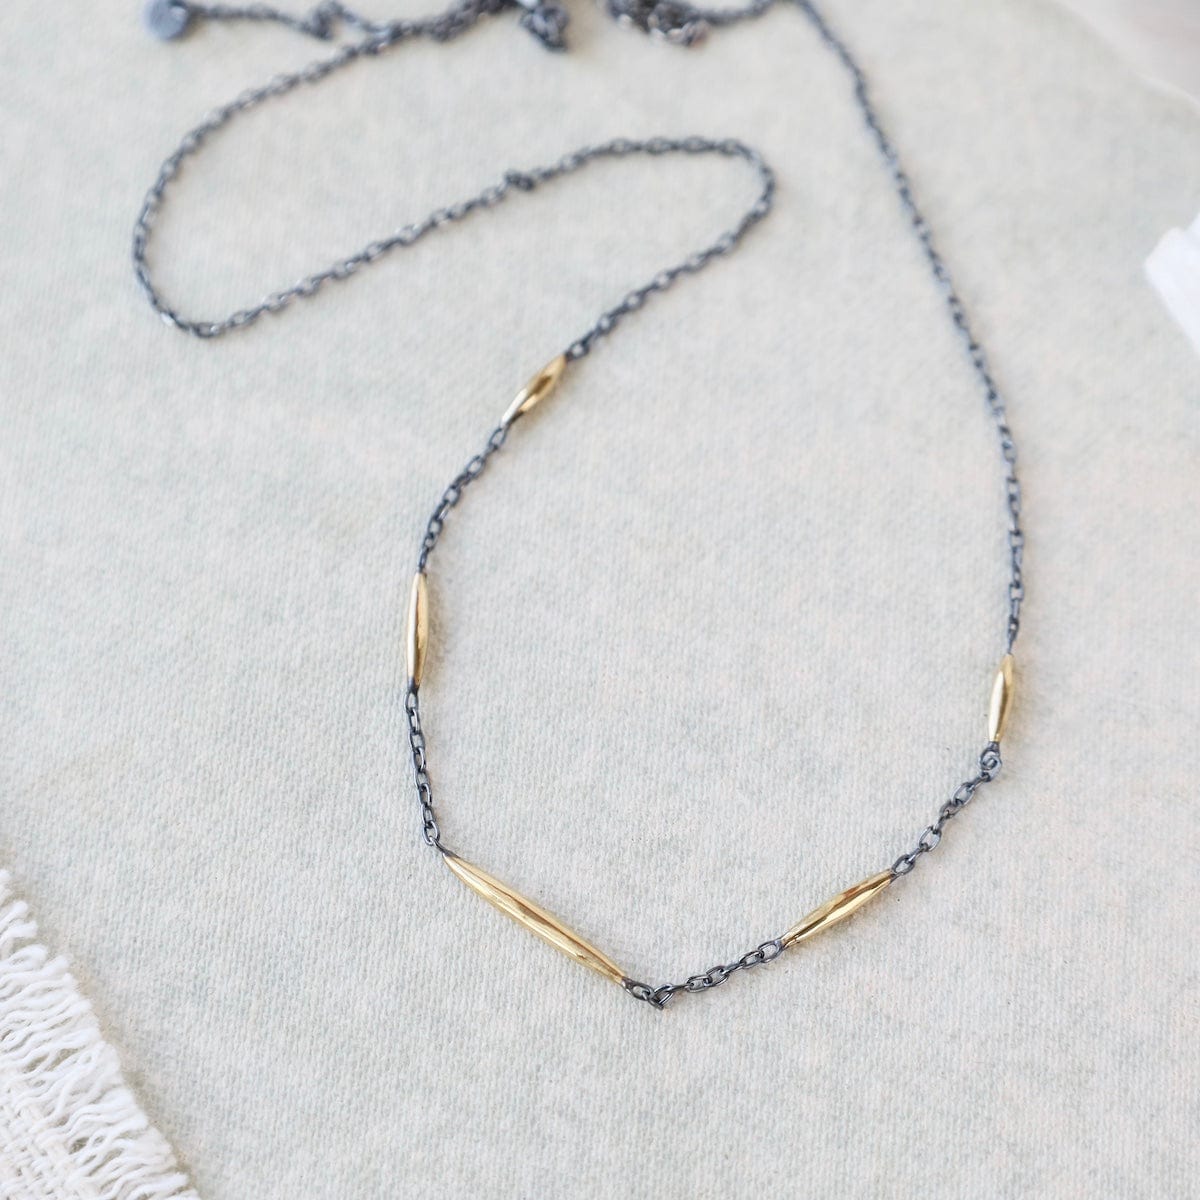 NKL-18K Murmur Necklace - oxidized silver and brushed 18k